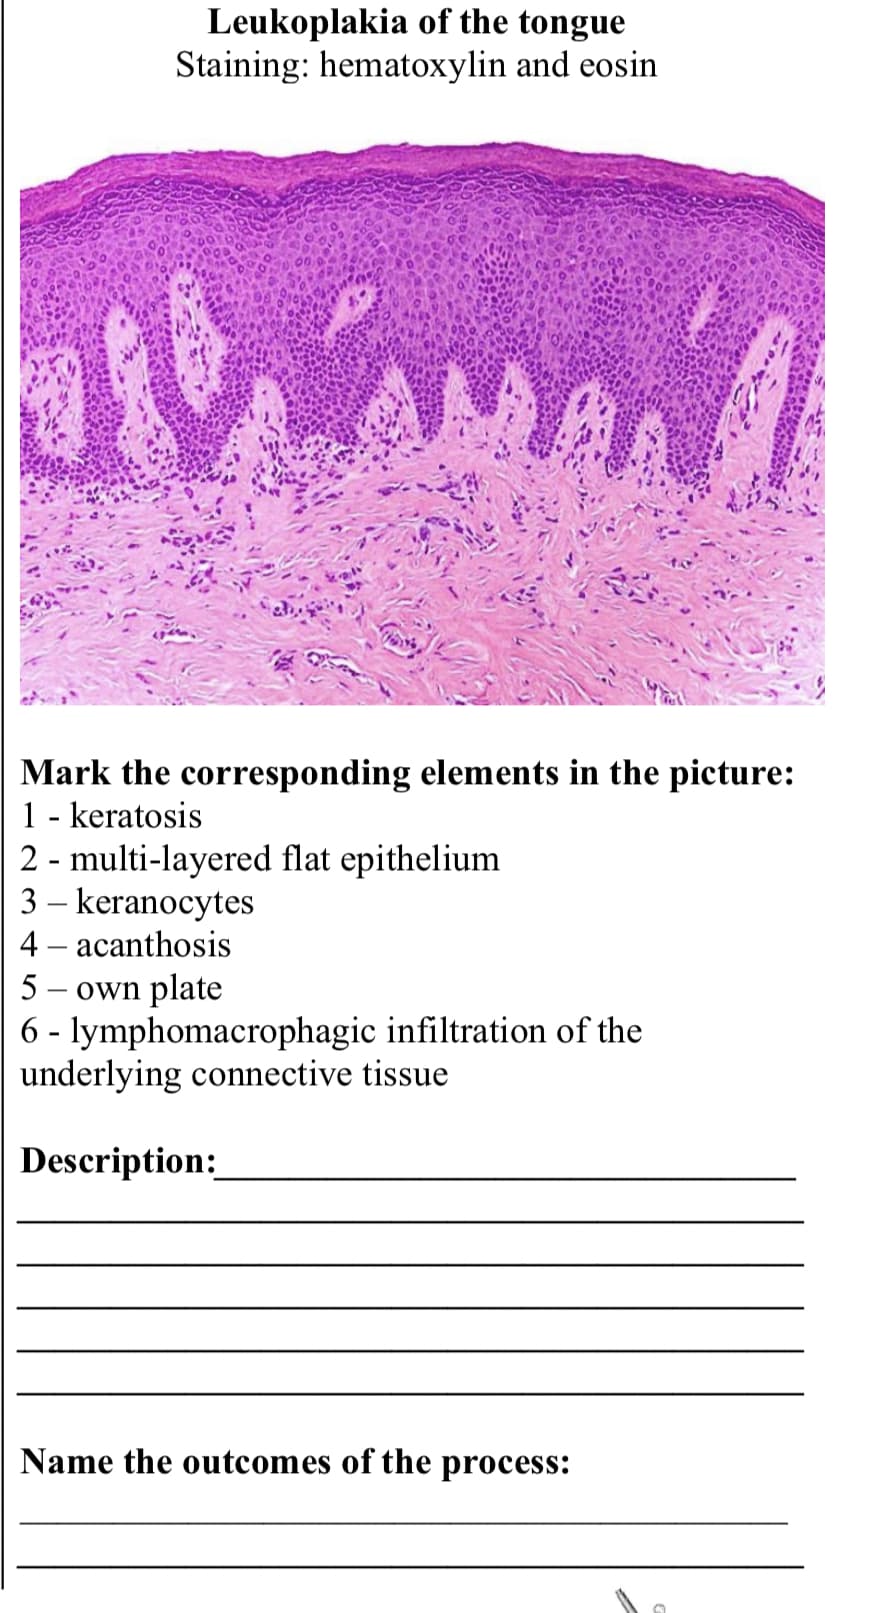 Leukoplakia of the tongue
Staining: hematoxylin and eosin
W
MAT
Mark the corresponding elements in the picture:
1 - keratosis
2 multi-layered flat epithelium
-
3 - keranocytes
4 - acanthosis
5 - own plate
6 - lymphomacrophagic infiltration of the
underlying connective tissue
Description:
Name the outcomes of the process:
0